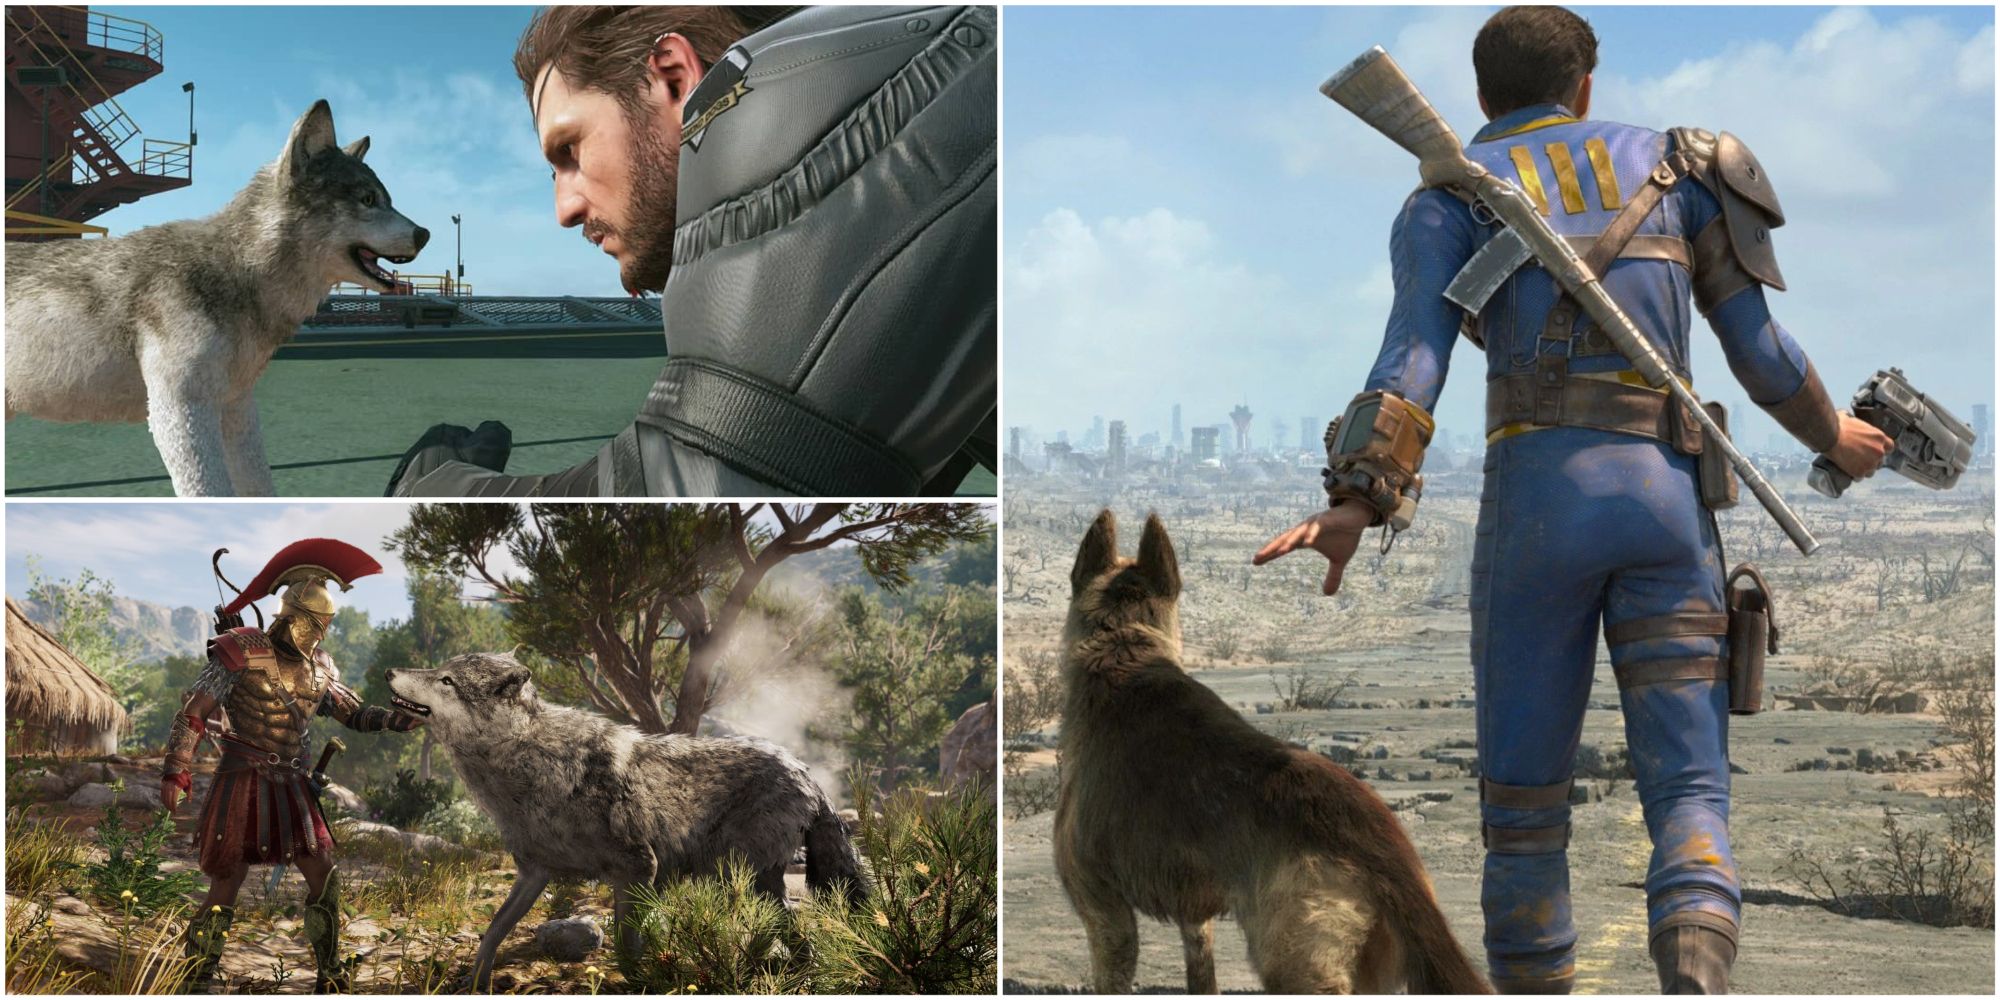 Venom Snake from MSGV playing with DD, Alexios from Assassins Creed Odyssey taming a wolf, and Fallout 4's Sole Survivor with Dogmeat